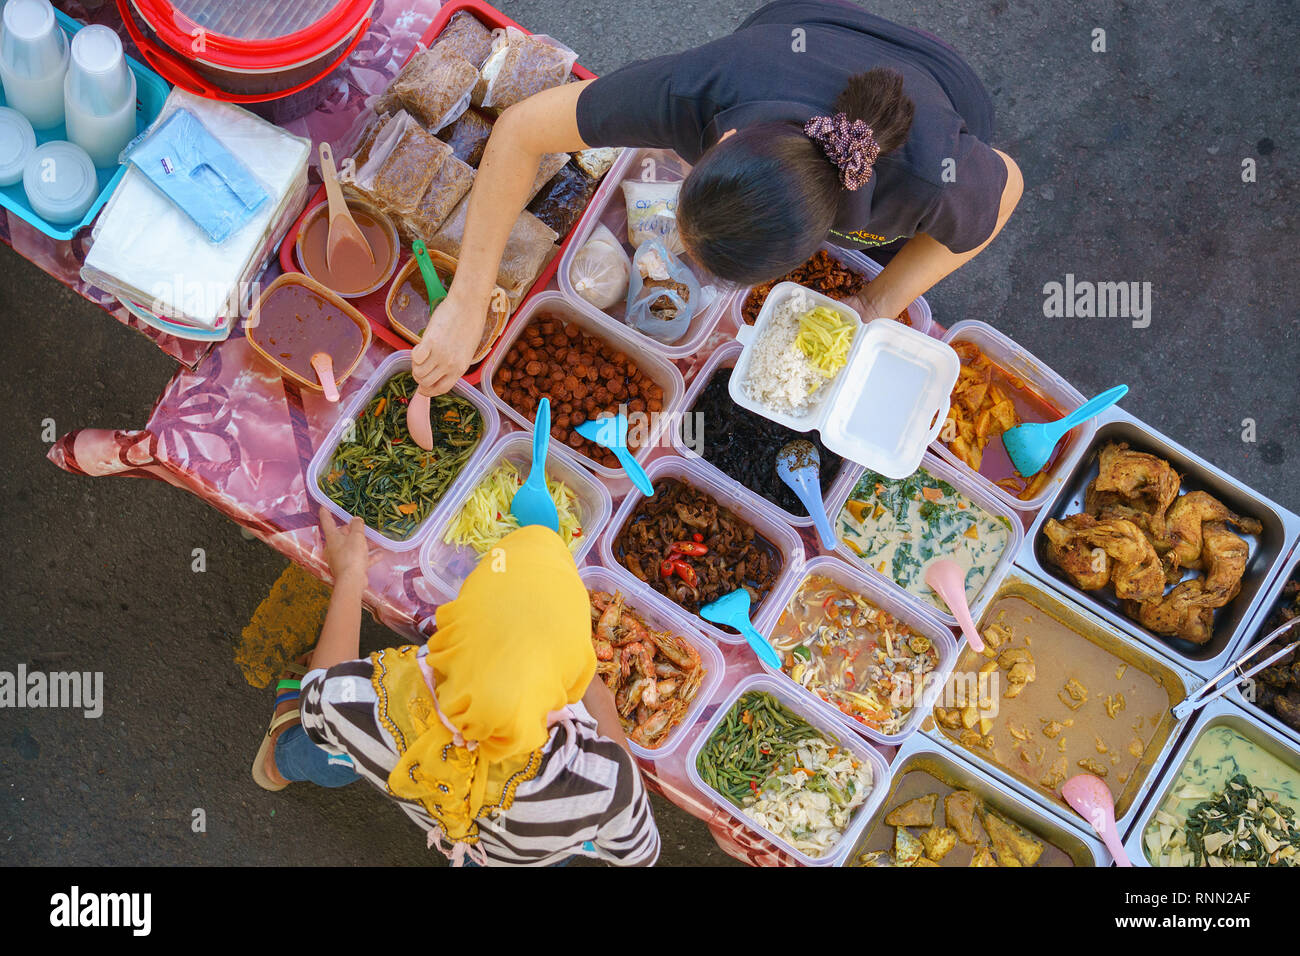 Kota Kinabalu Sabah Malaysia - Jun 17, 2016 : Street food vendor selling Malaysian home cooked dishes for breaking fast during month of Ramadhan at st Stock Photo